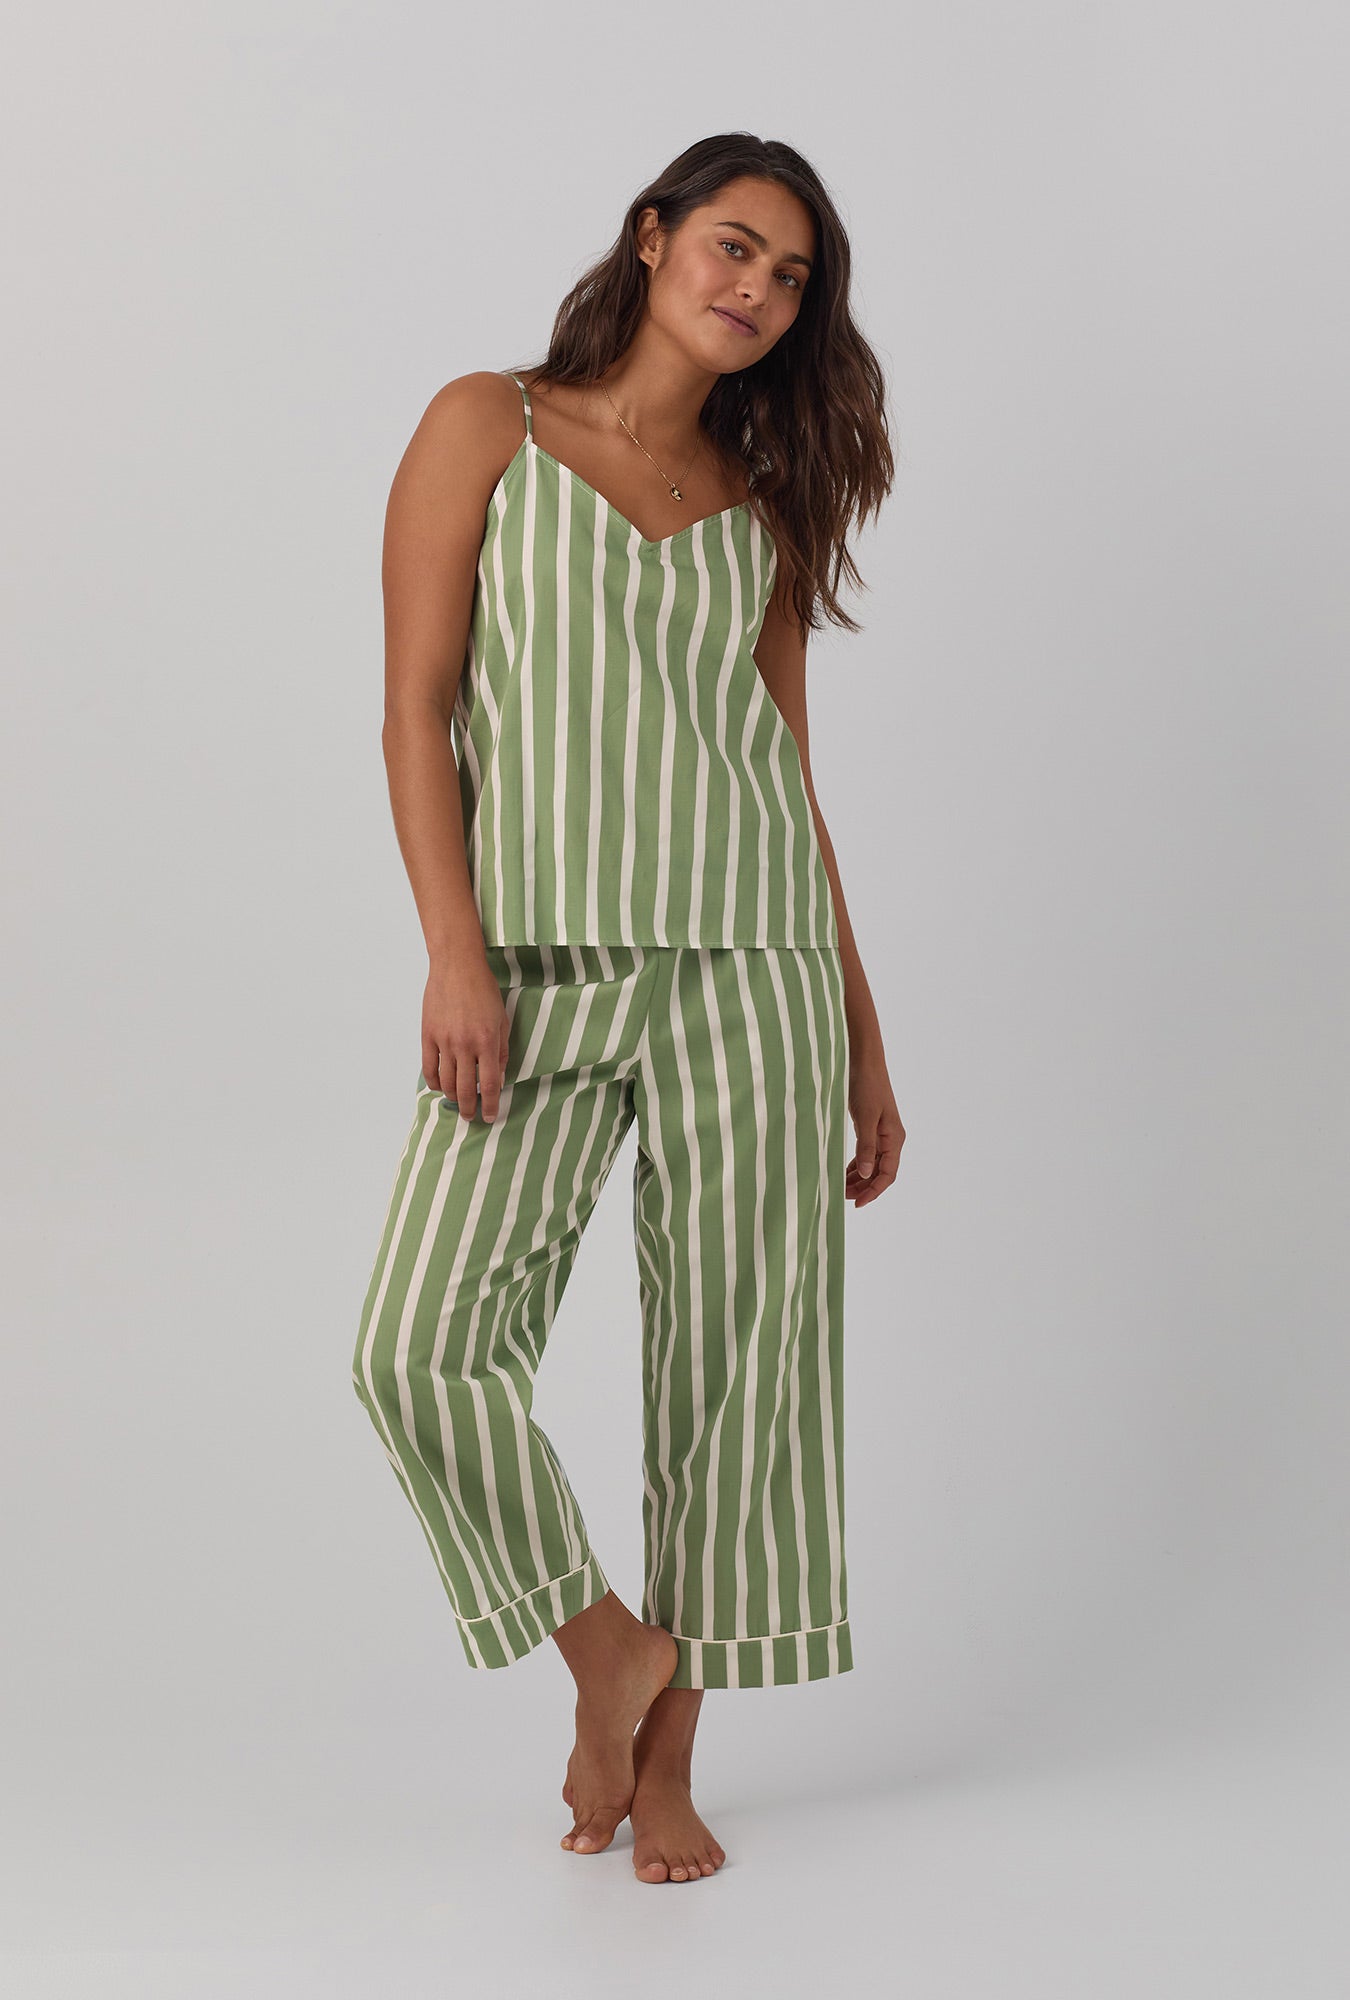 A lady wearing green Woven Cotton Sateen Cropped PJ Set with North Shore Stripe print.